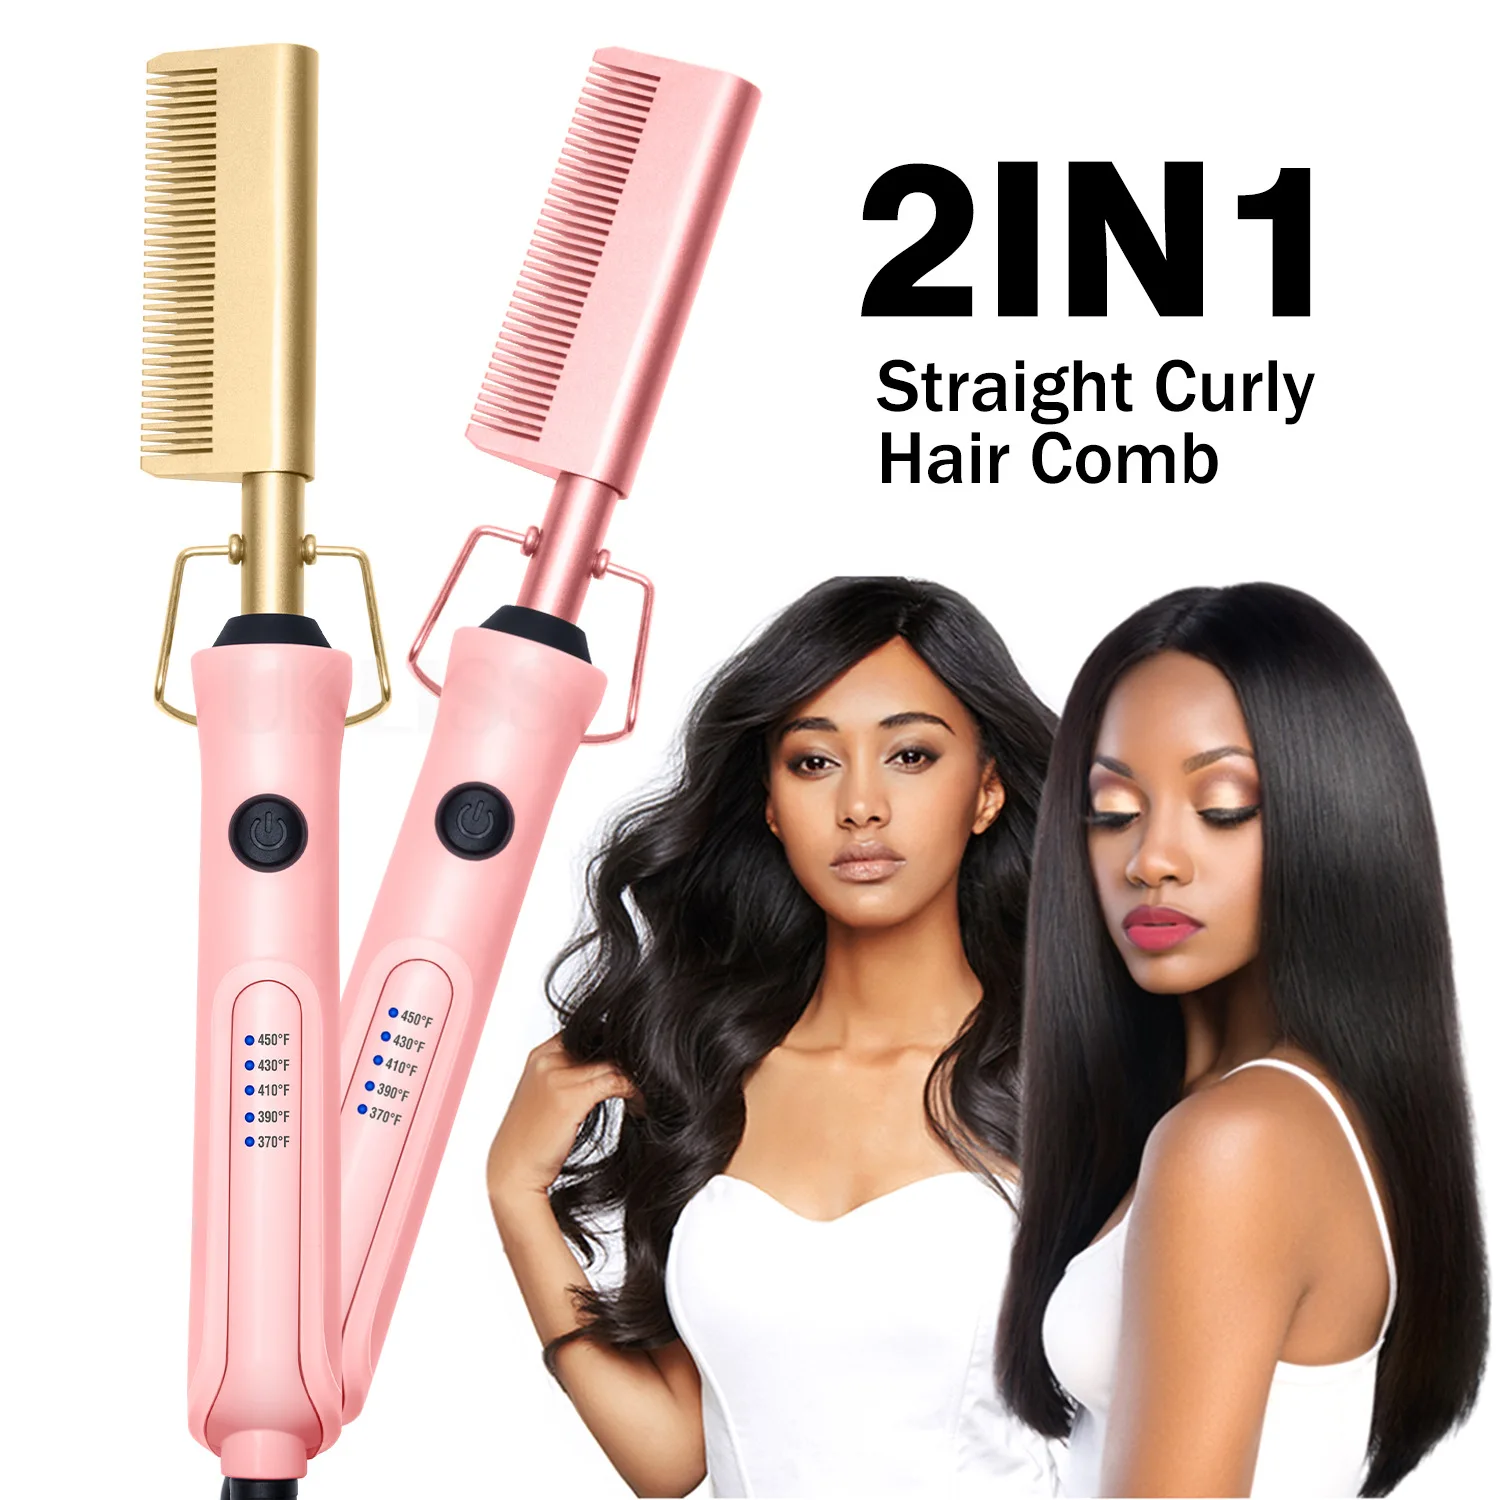 

2 in 1 Hot Comb Straightener Electric Hair Straightener Hair Curler Wet Dry Use Hair Flat Irons Hot Heating Comb For Hair Stylin